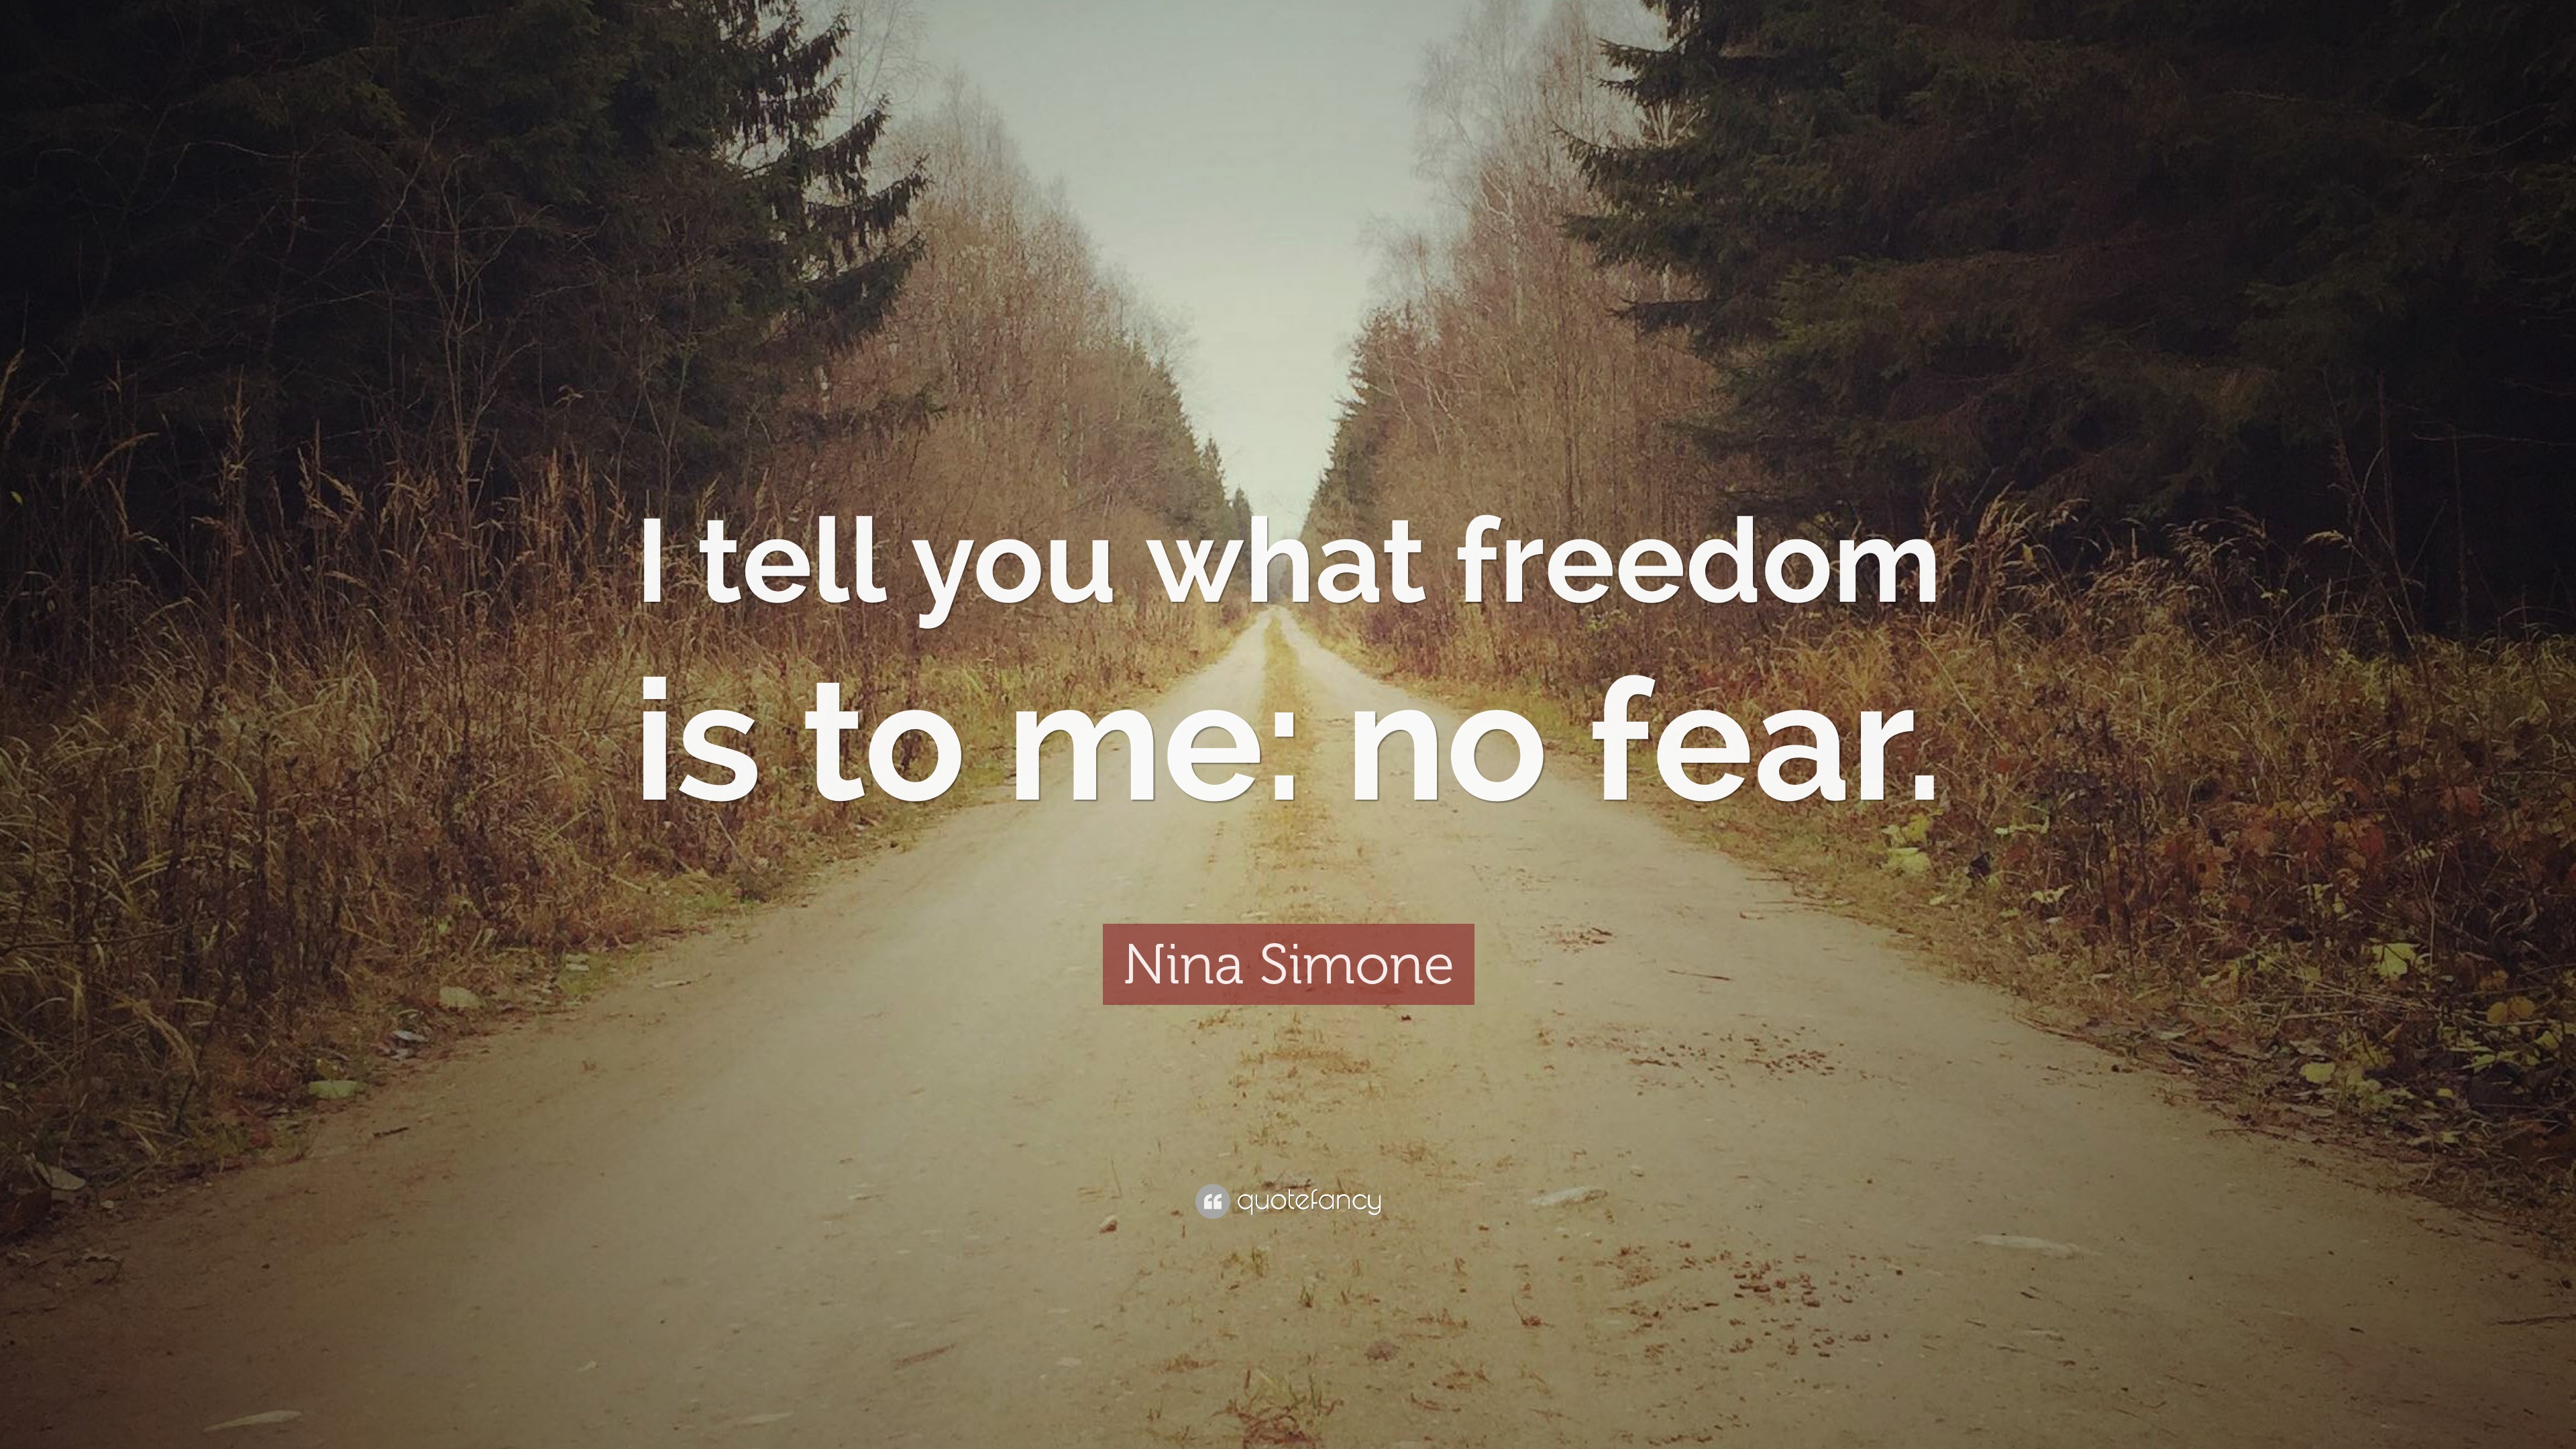 Nina Simone Quote: “I tell you what freedom is to me: no fear.”